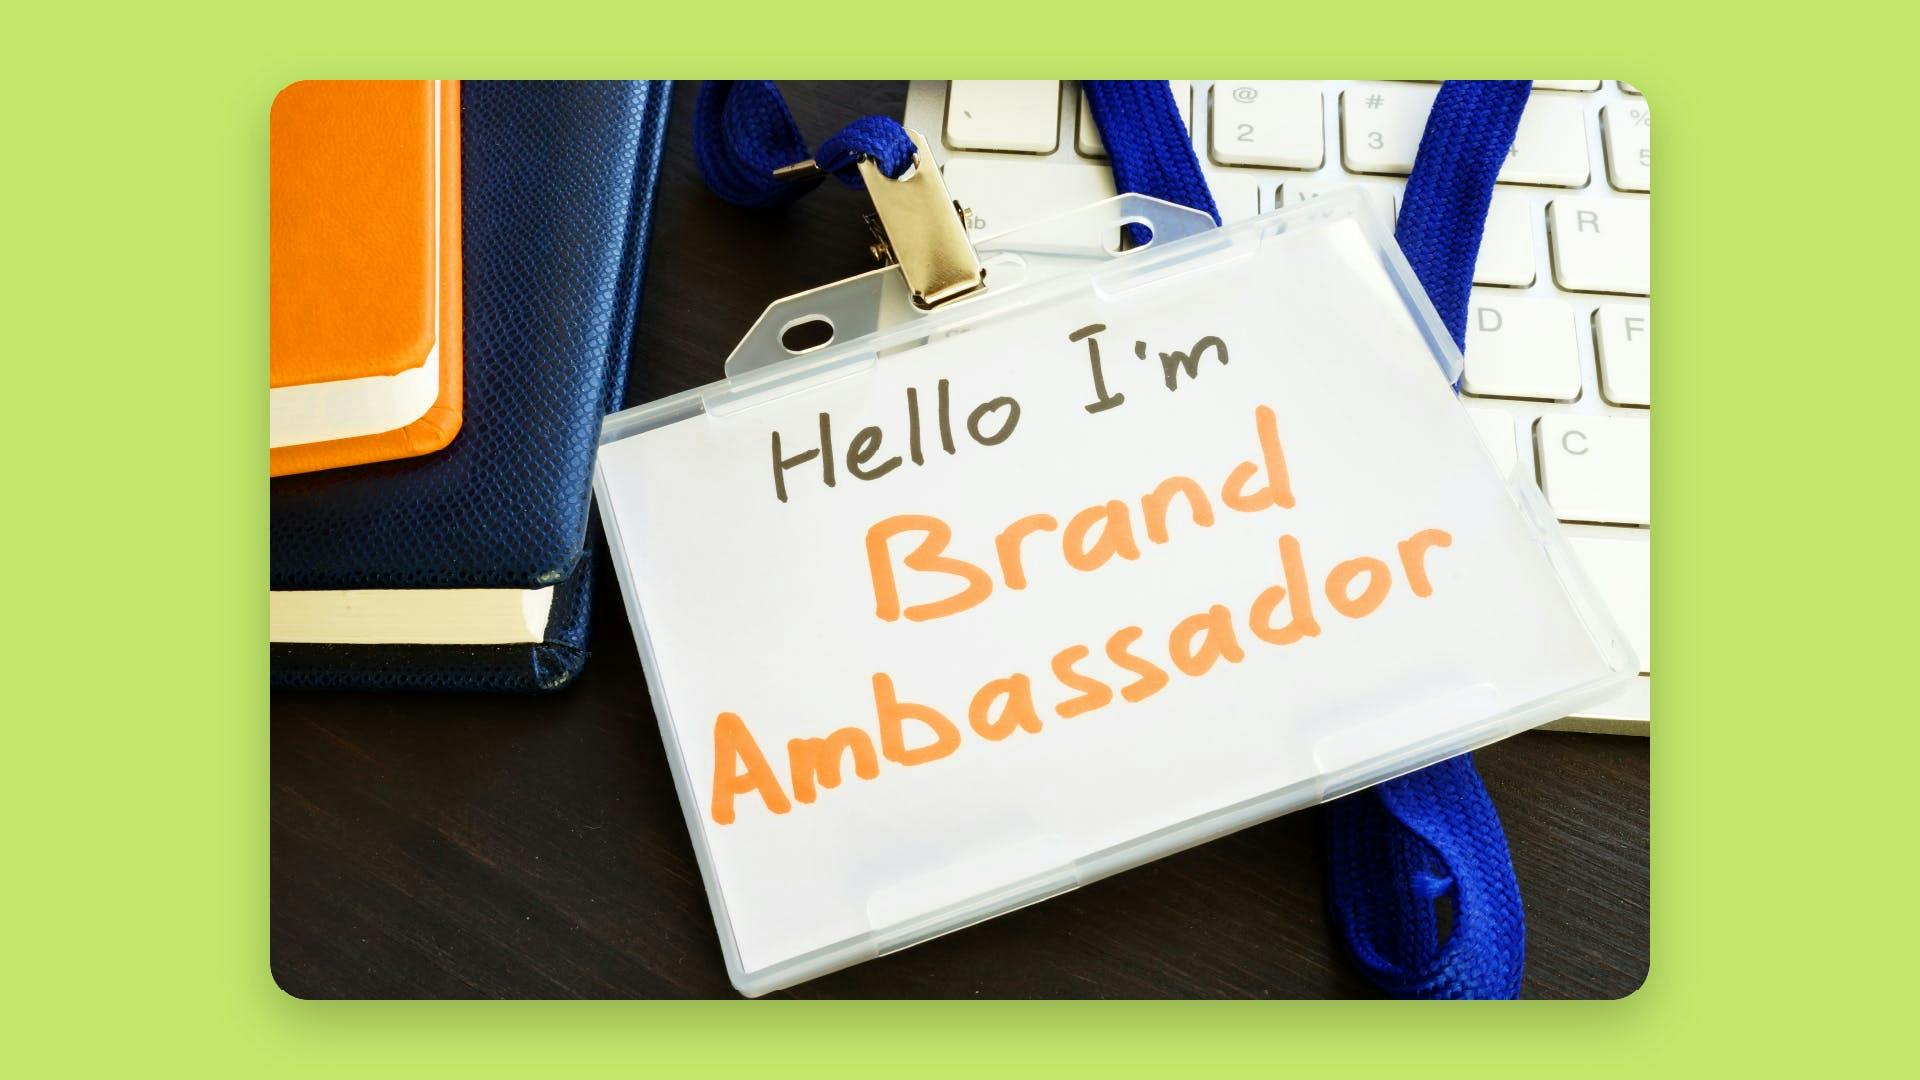 What is a brand ambassador role